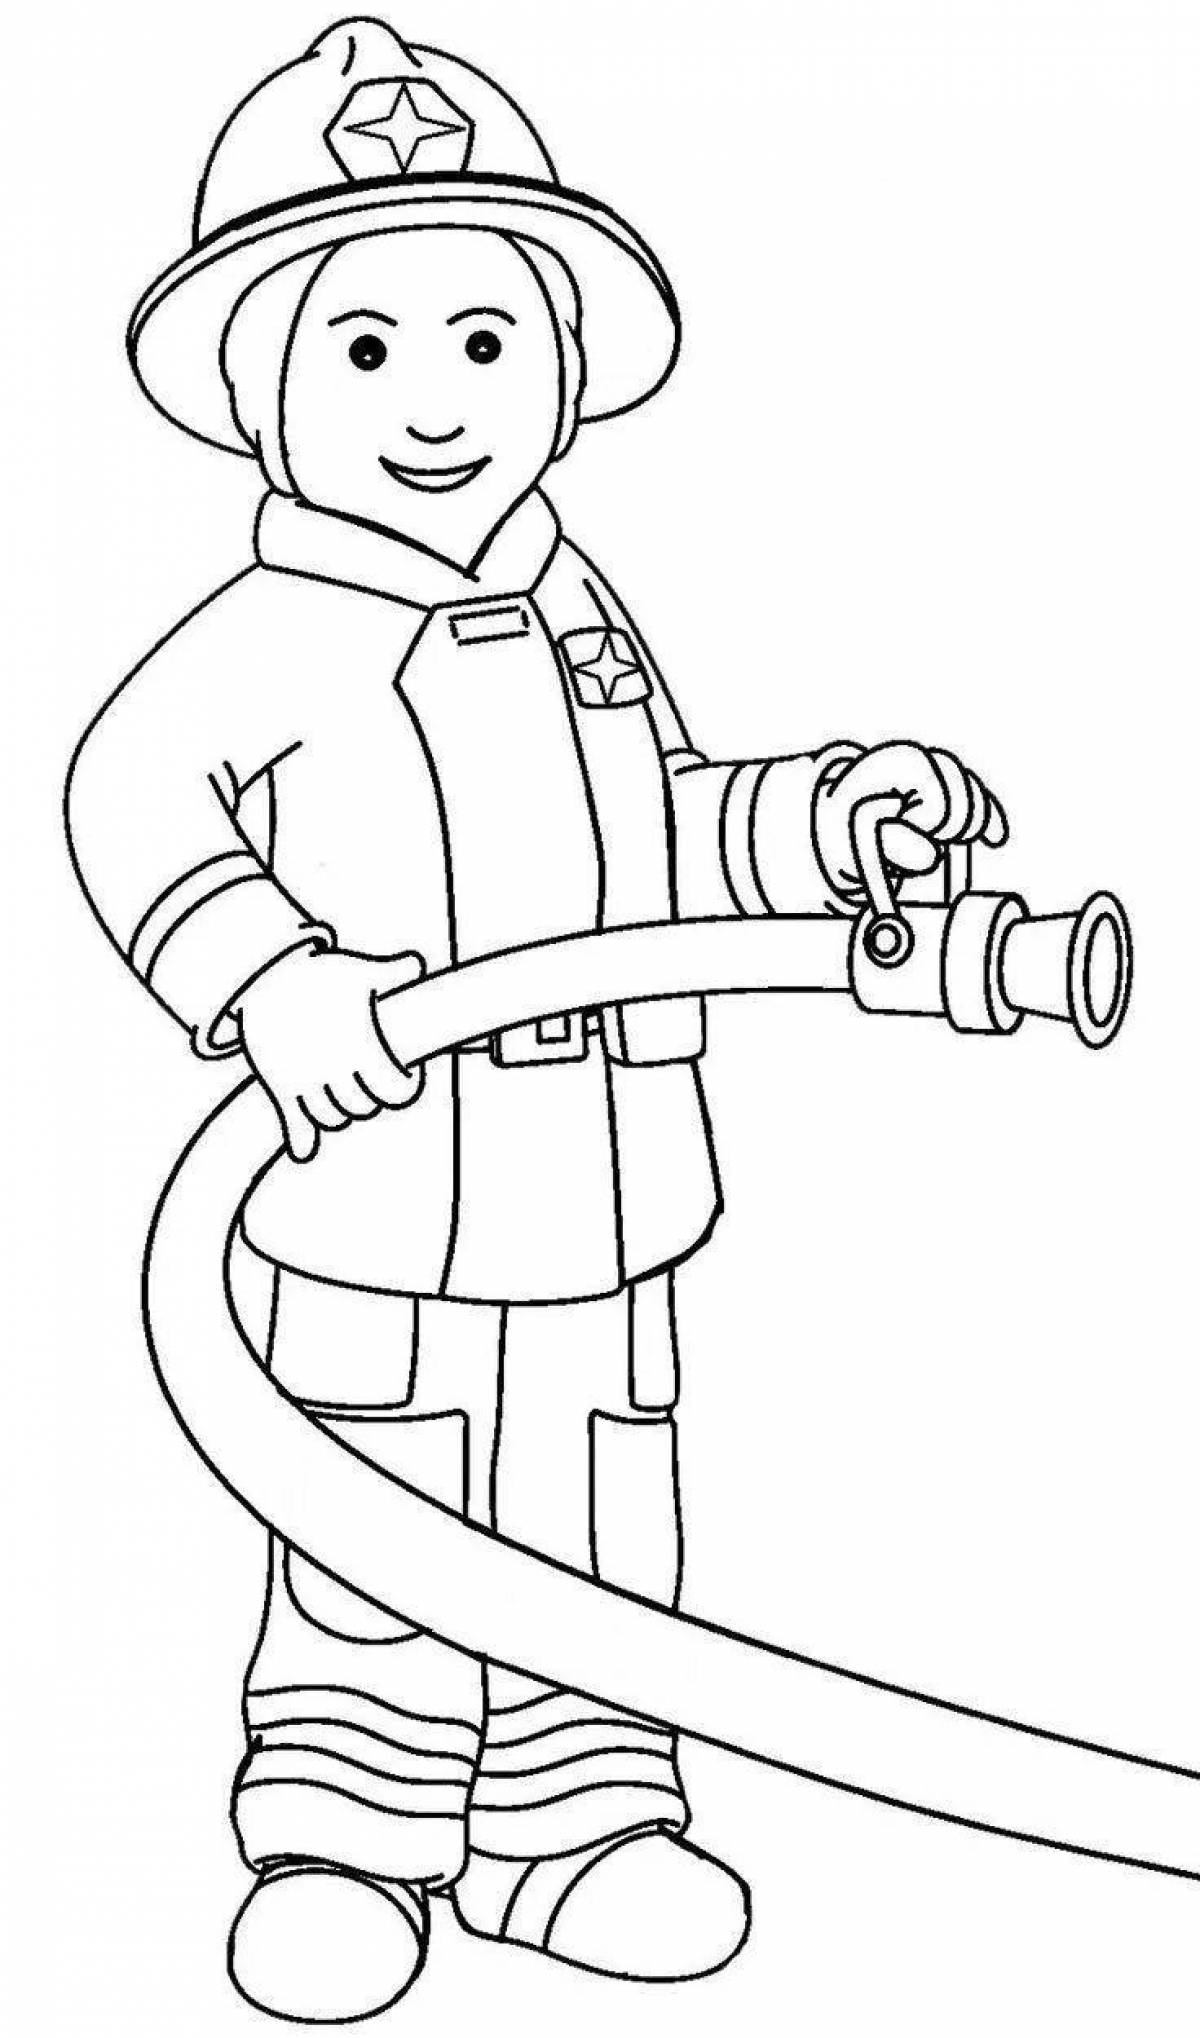 Dynamic firefighter profession coloring page